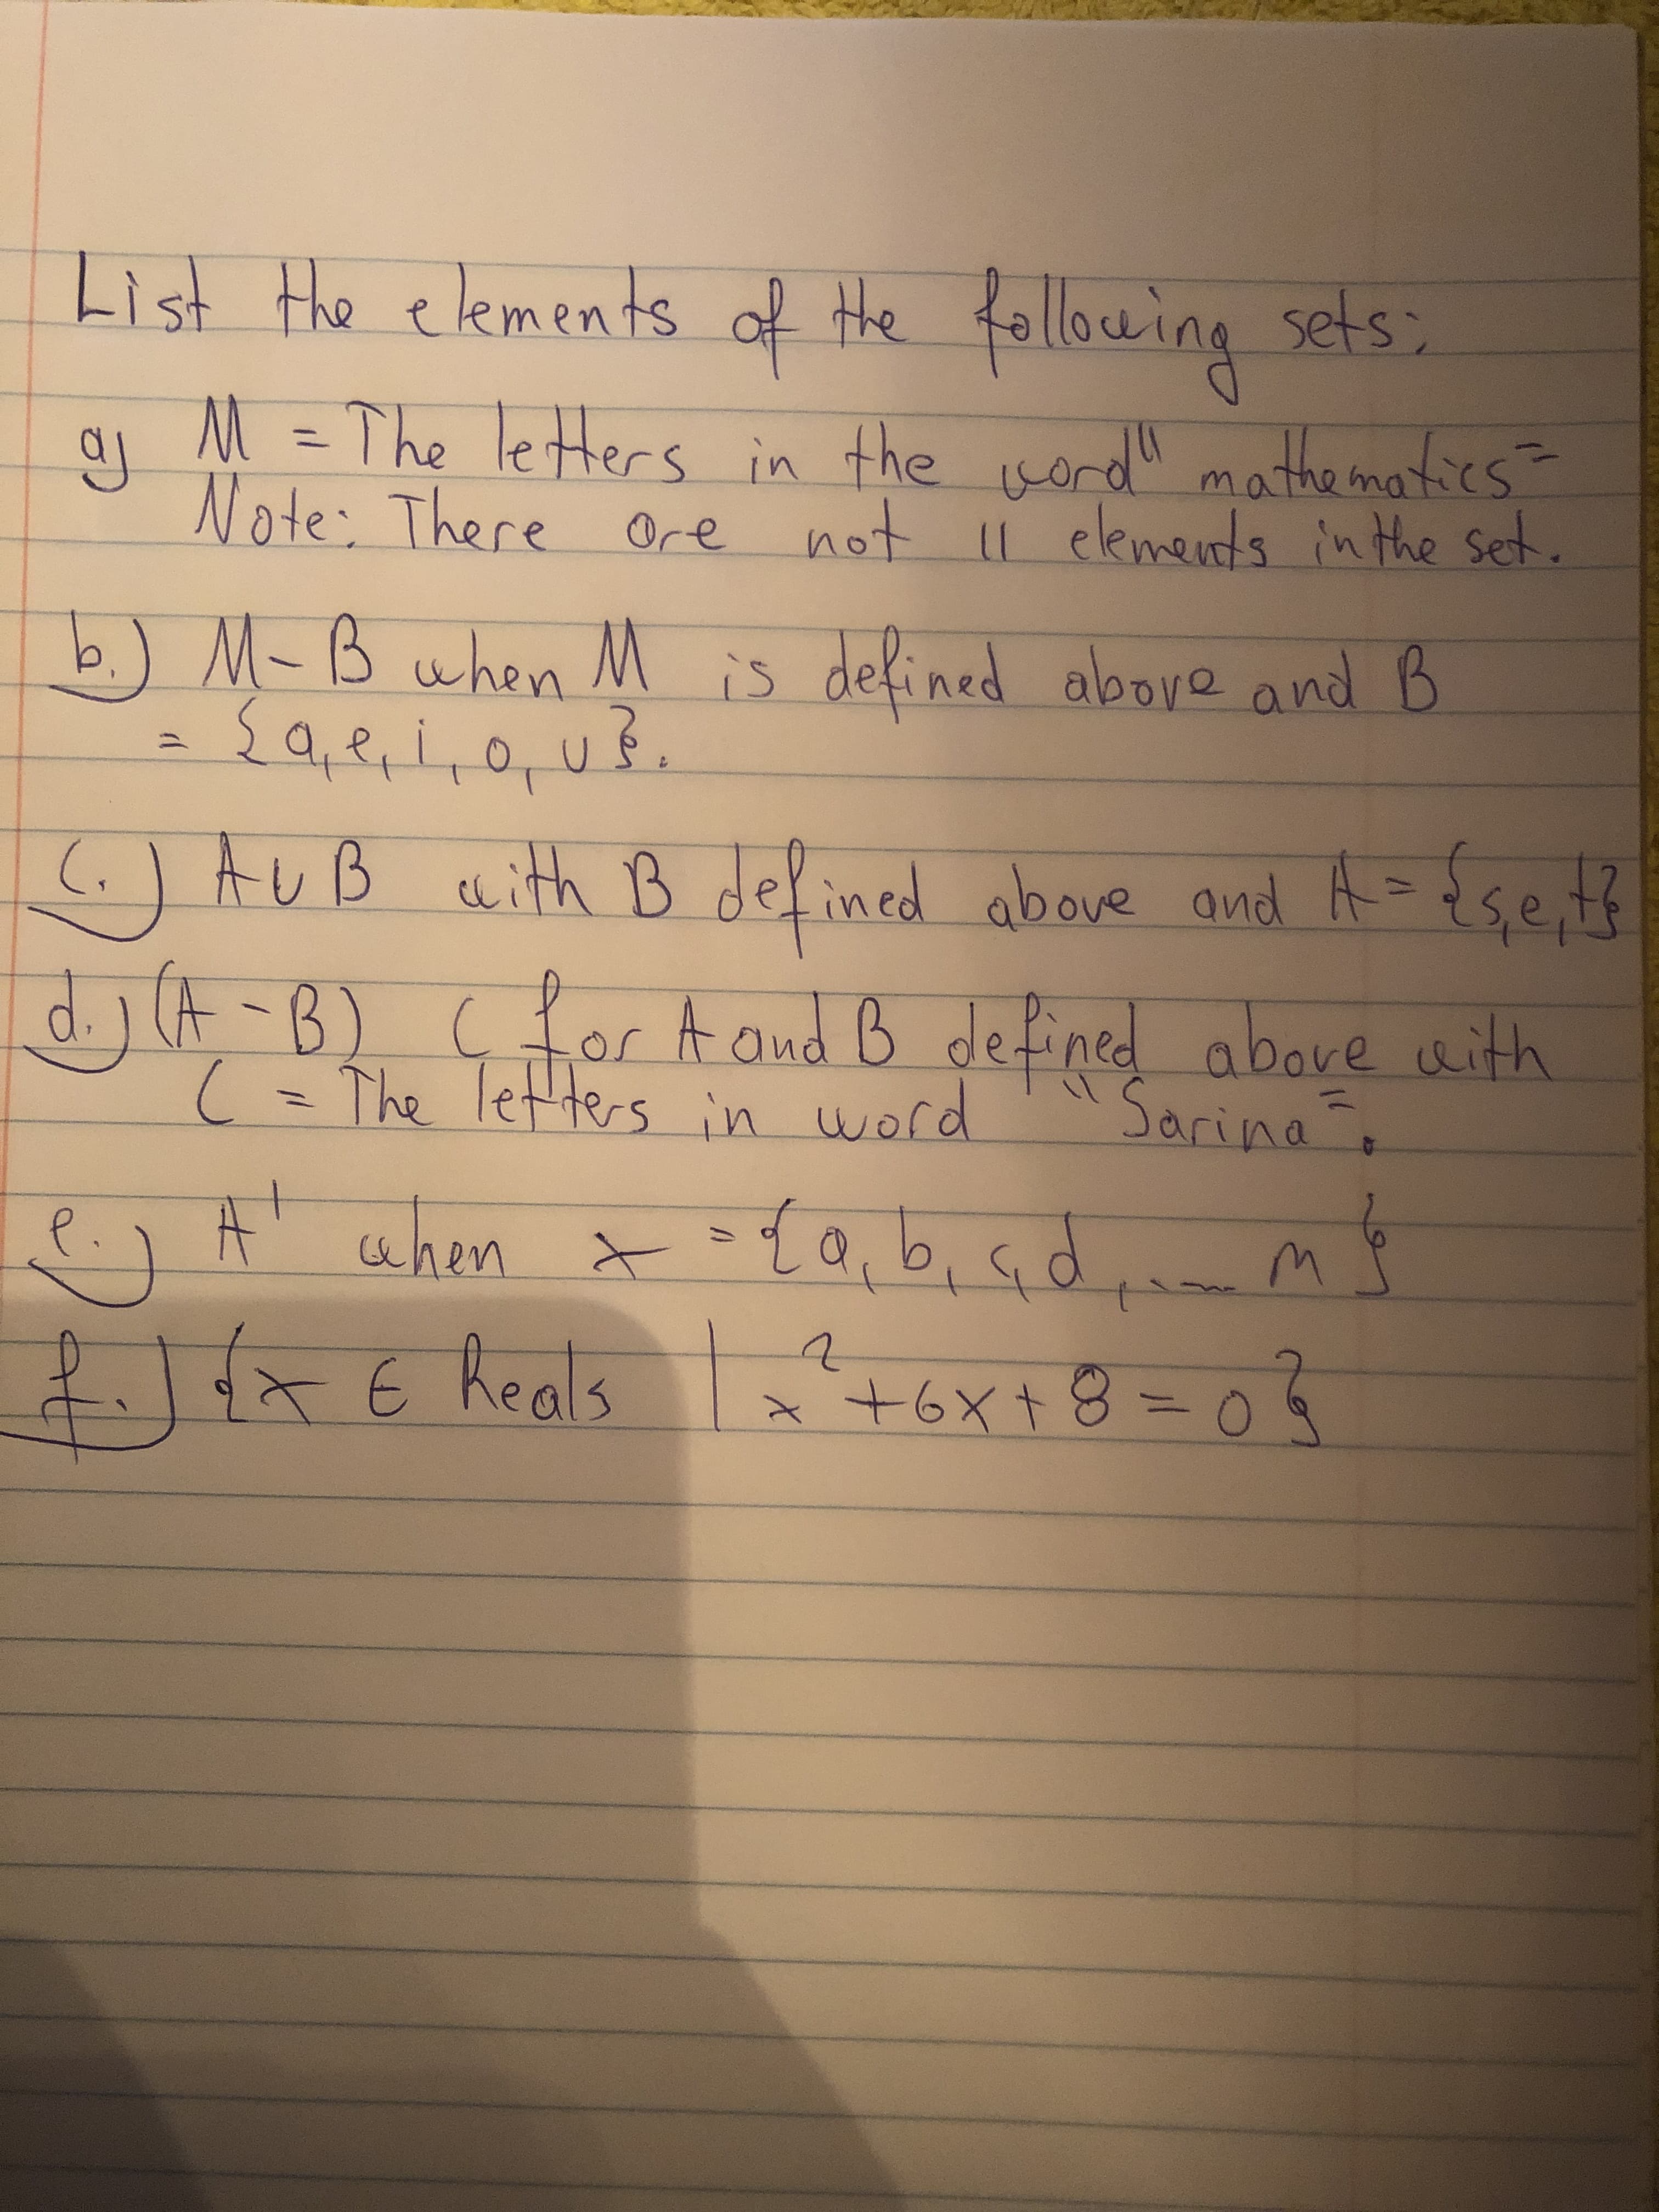 List the elements of the
following sets;
M%3DThe letters in the isordu mathematics=
word"
Note: There Ore not ll elements in the set.
11
b.) M-B when M is defined albove and B
is defined aboe and B
0,
(.
:)AUB {se
with B delined above and A=
